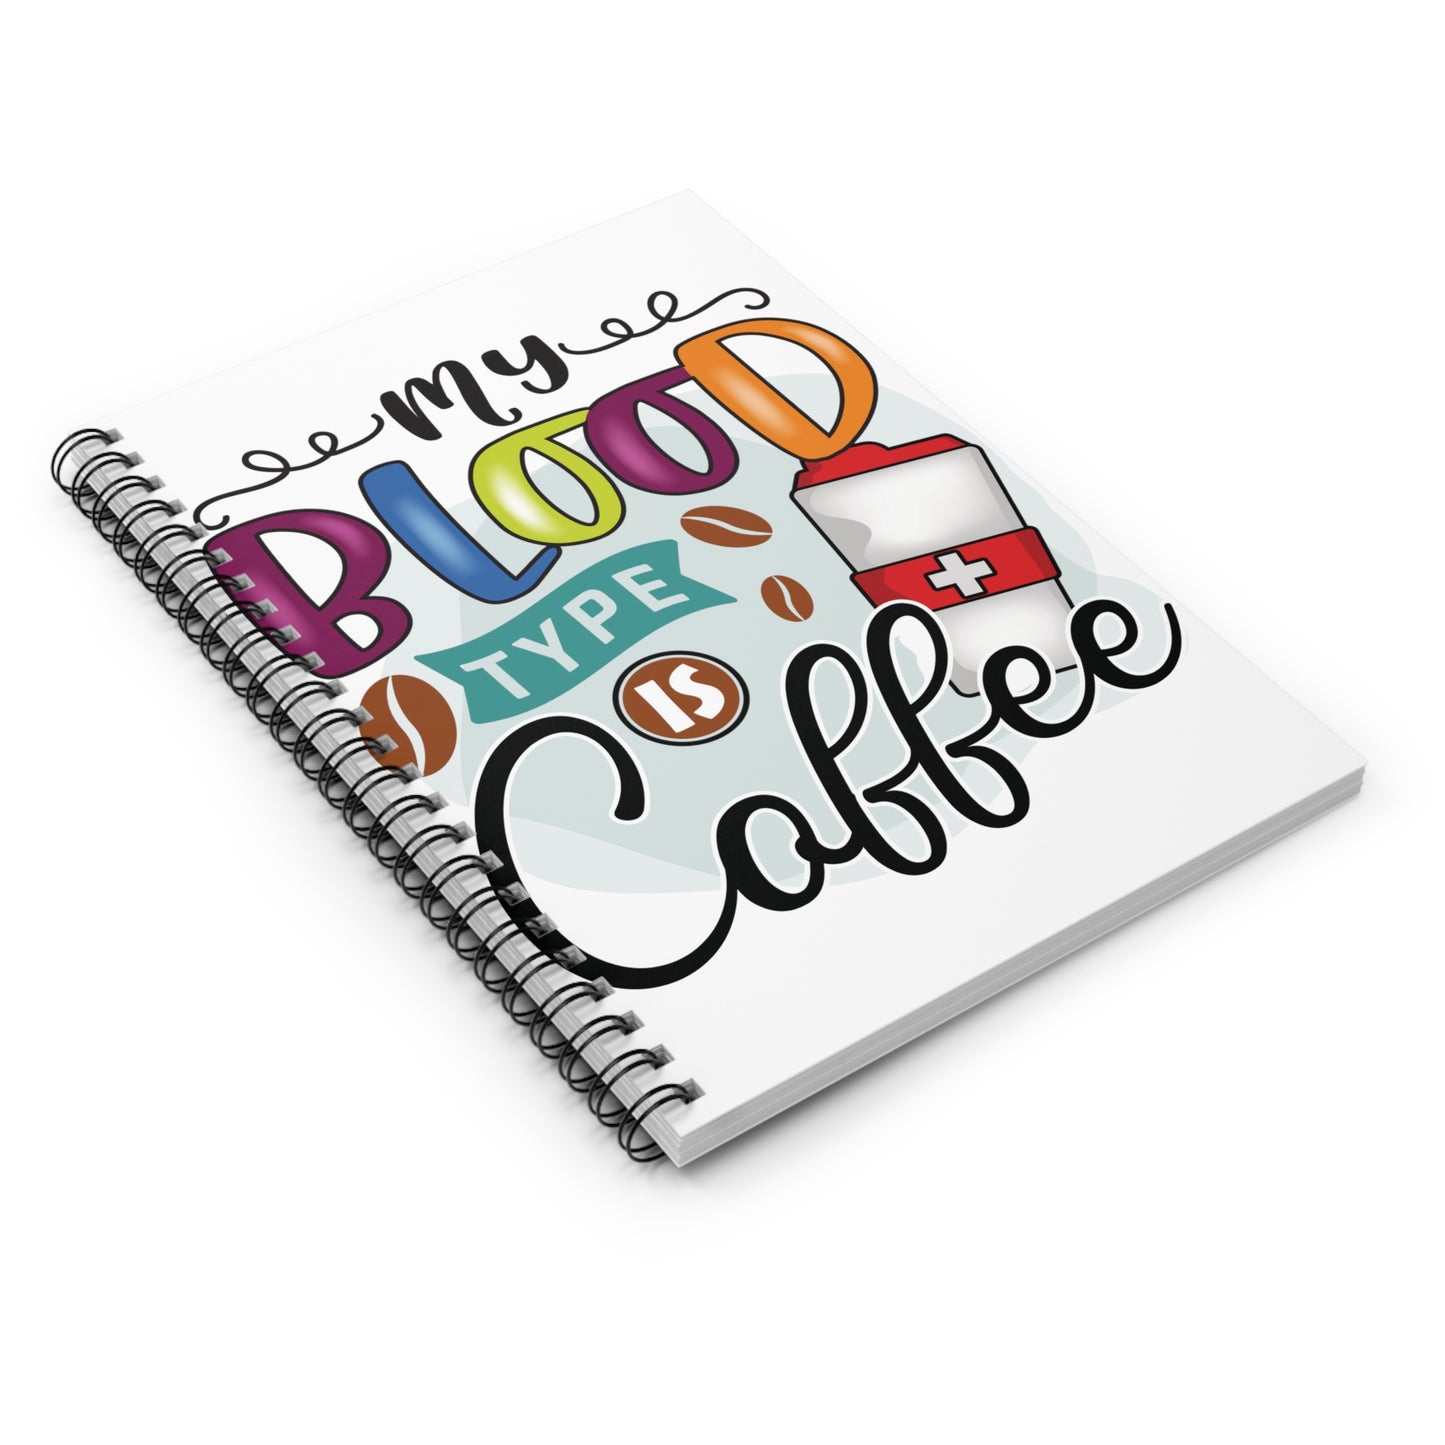 Blood Type is Coffee: Spiral Notebook - Log Books - Journals - Diaries - and More Custom Printed by TheGlassyLass